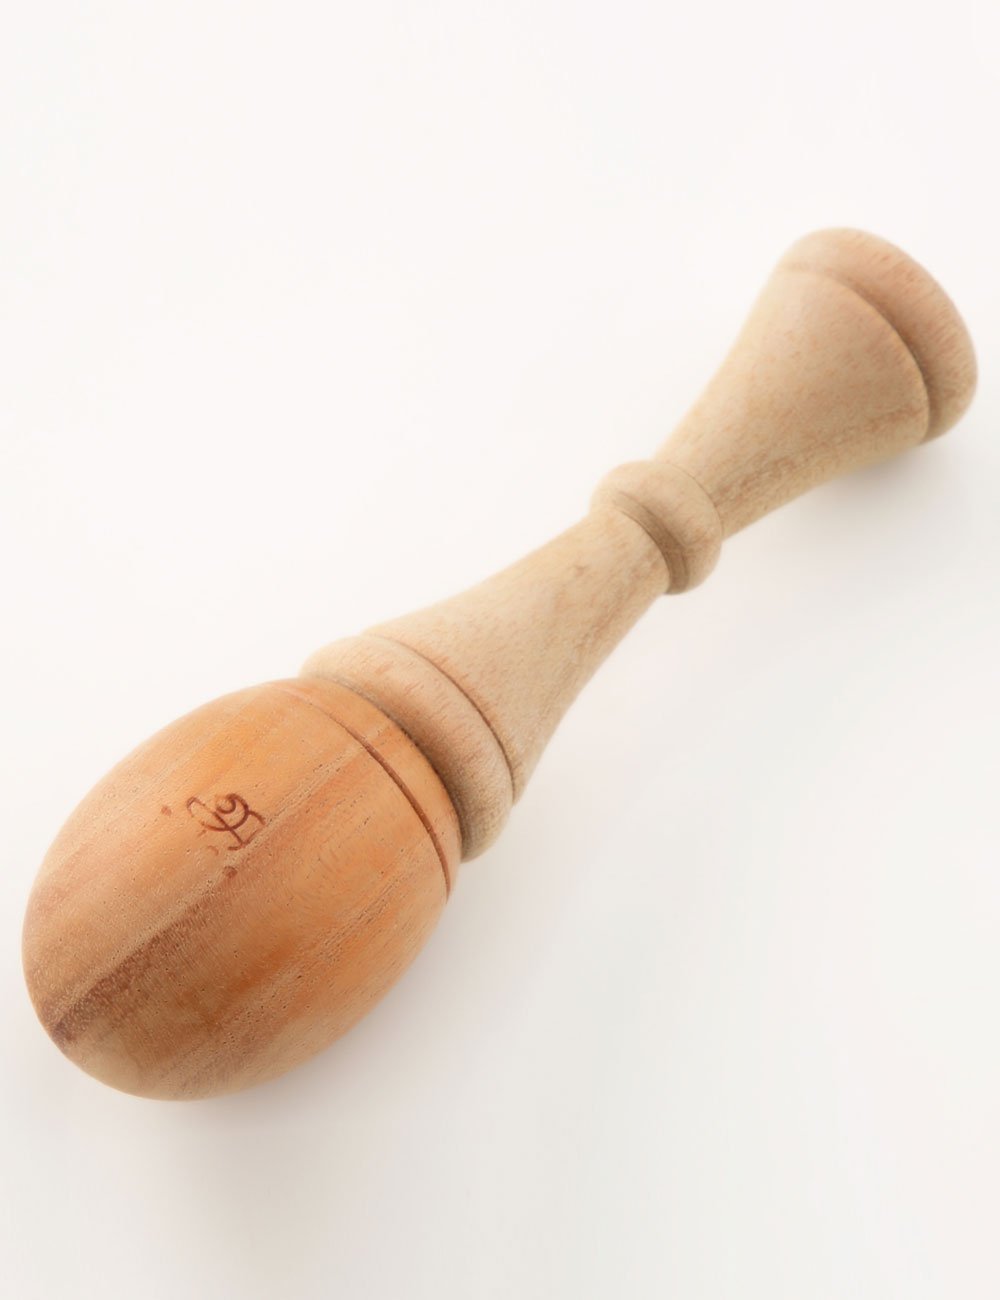 Neem Wooden Rattle - Classic closed